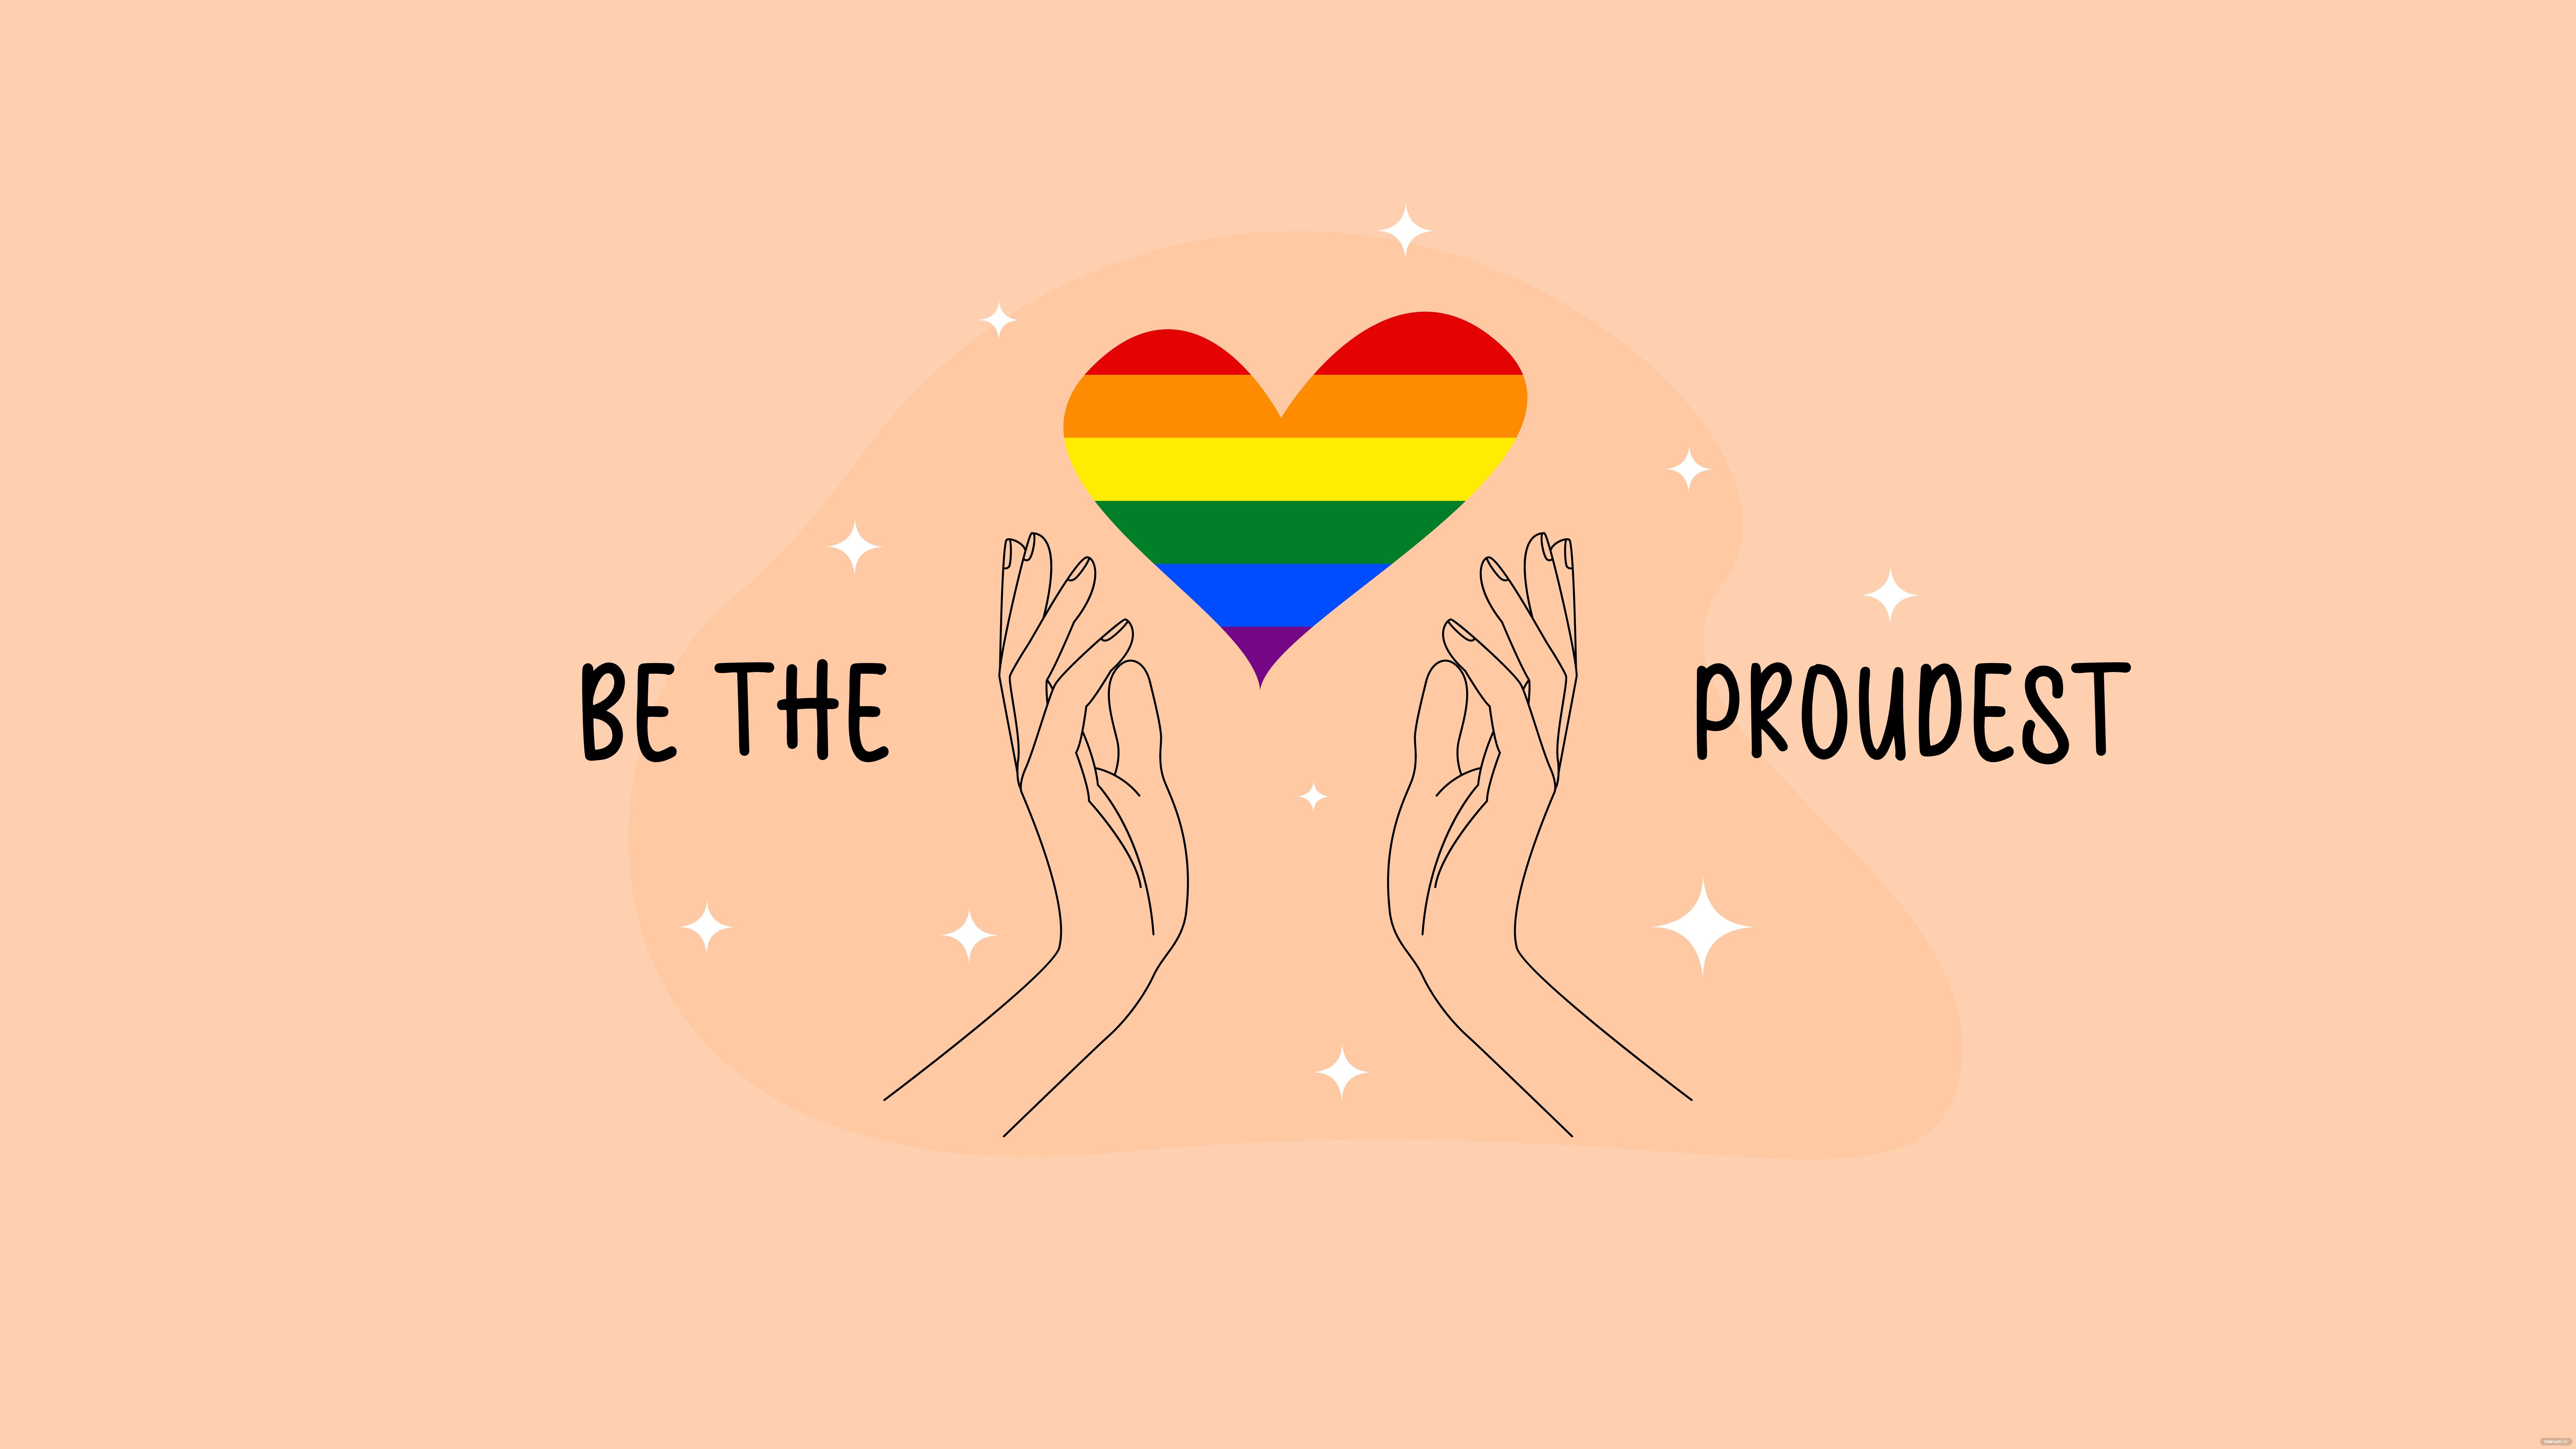 Be the proudest - Couple, pride